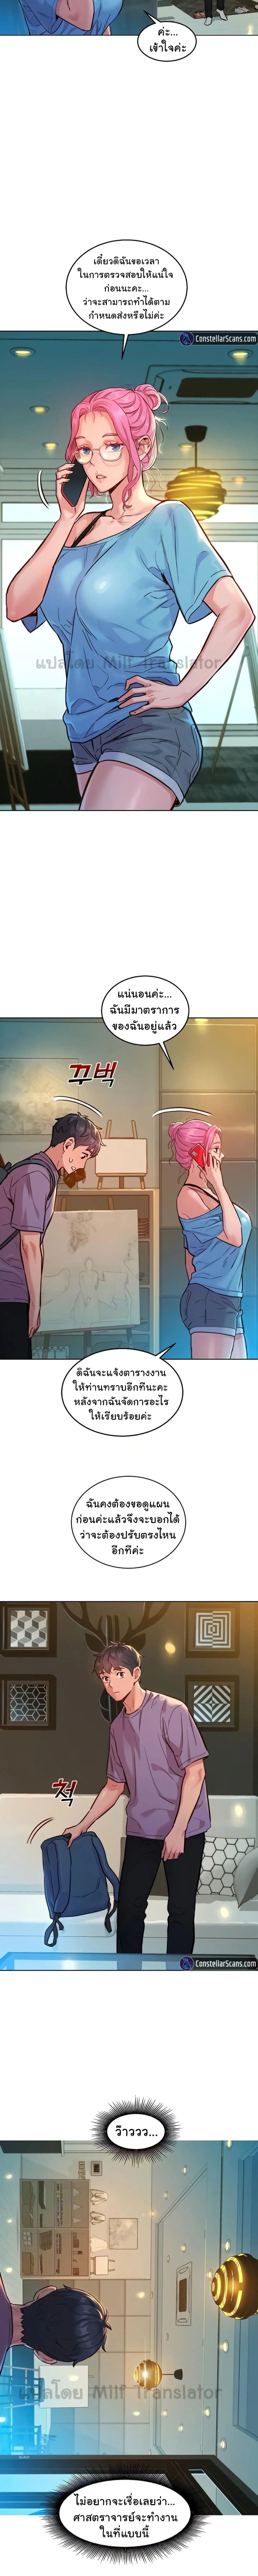 Let’s Hang Out from Today ตอนที่ 17 ภาพ 1